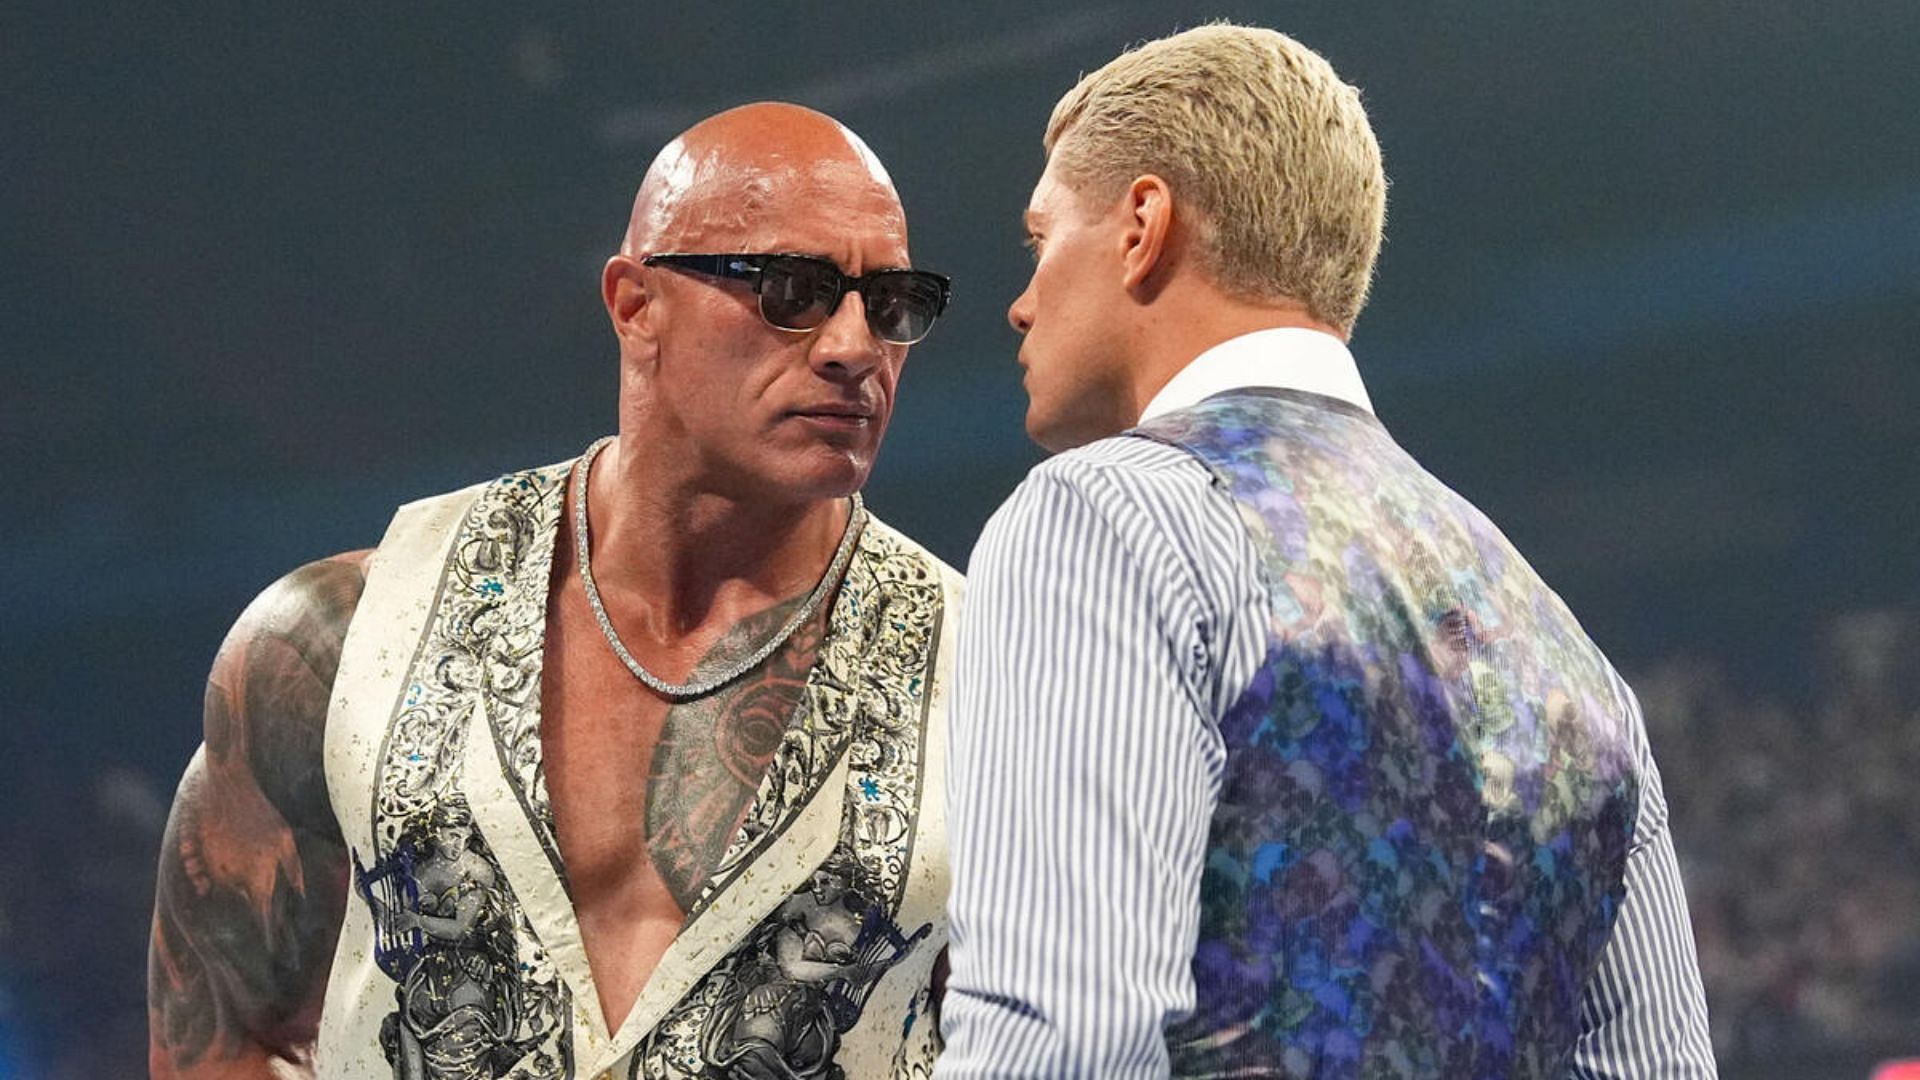 The Rock and Cody Rhodes were involved in the opening and closing segment of RAW